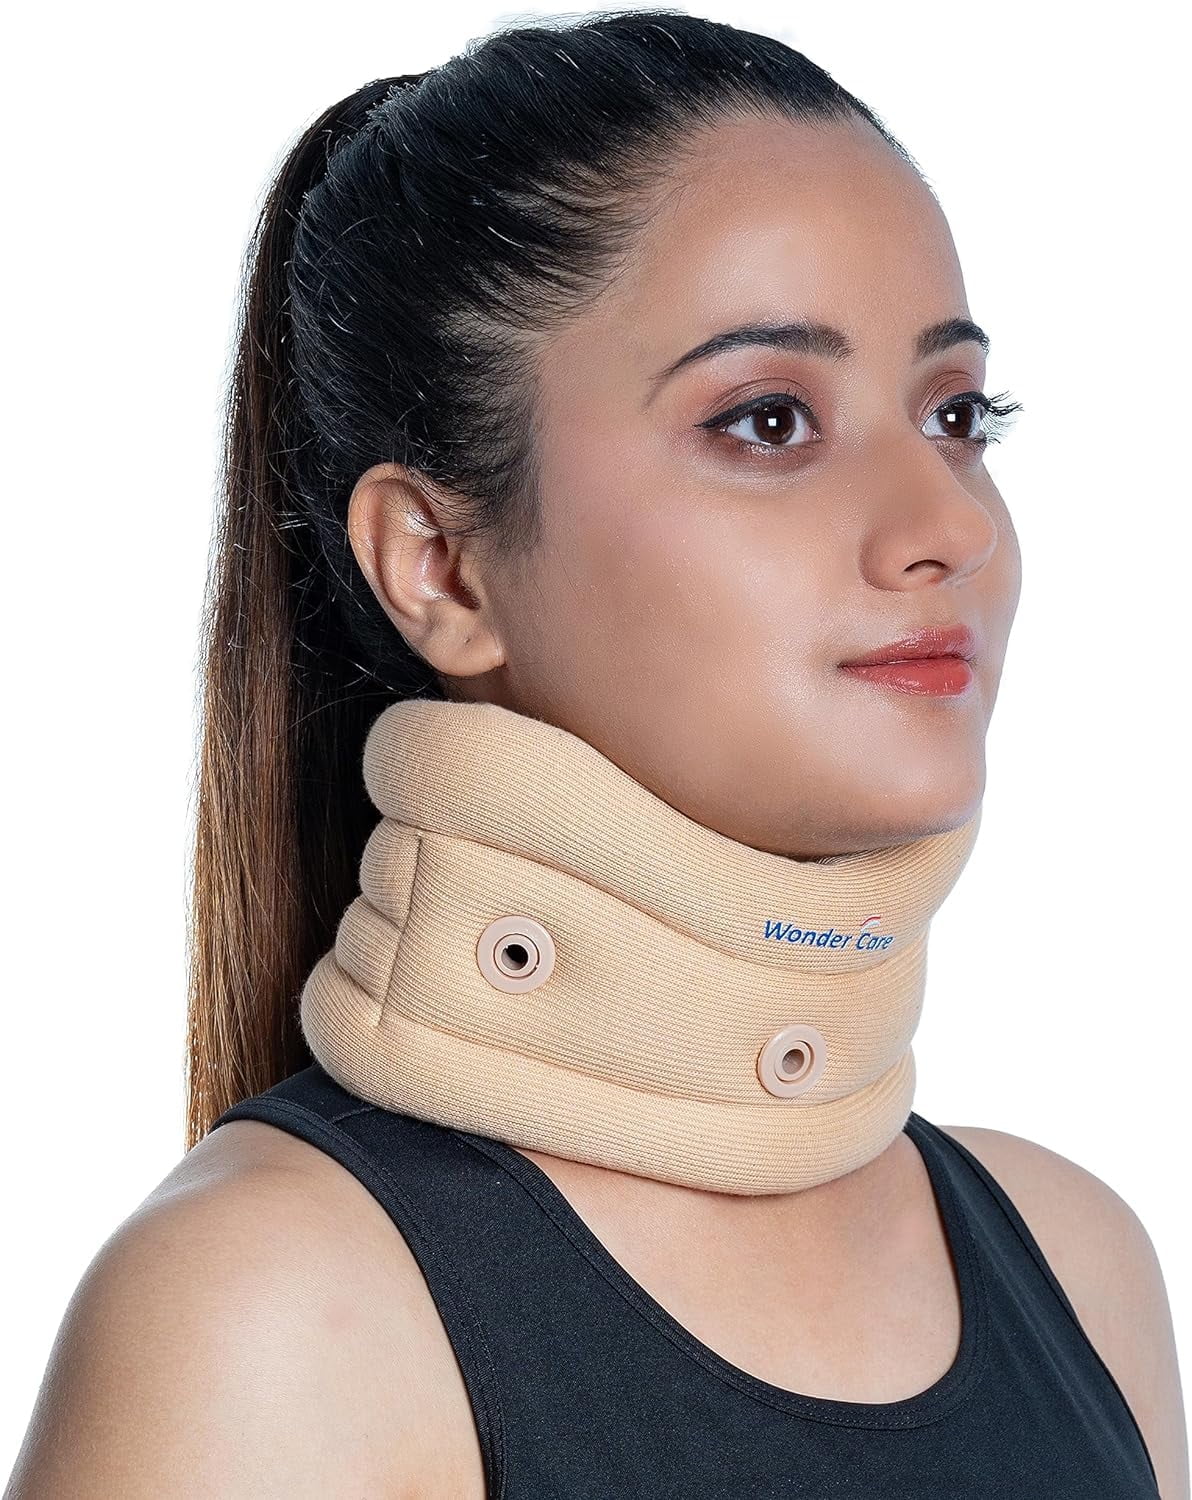 CERVICAL COLLAR SOFT WITH SUPPORT – Surgical Avenue